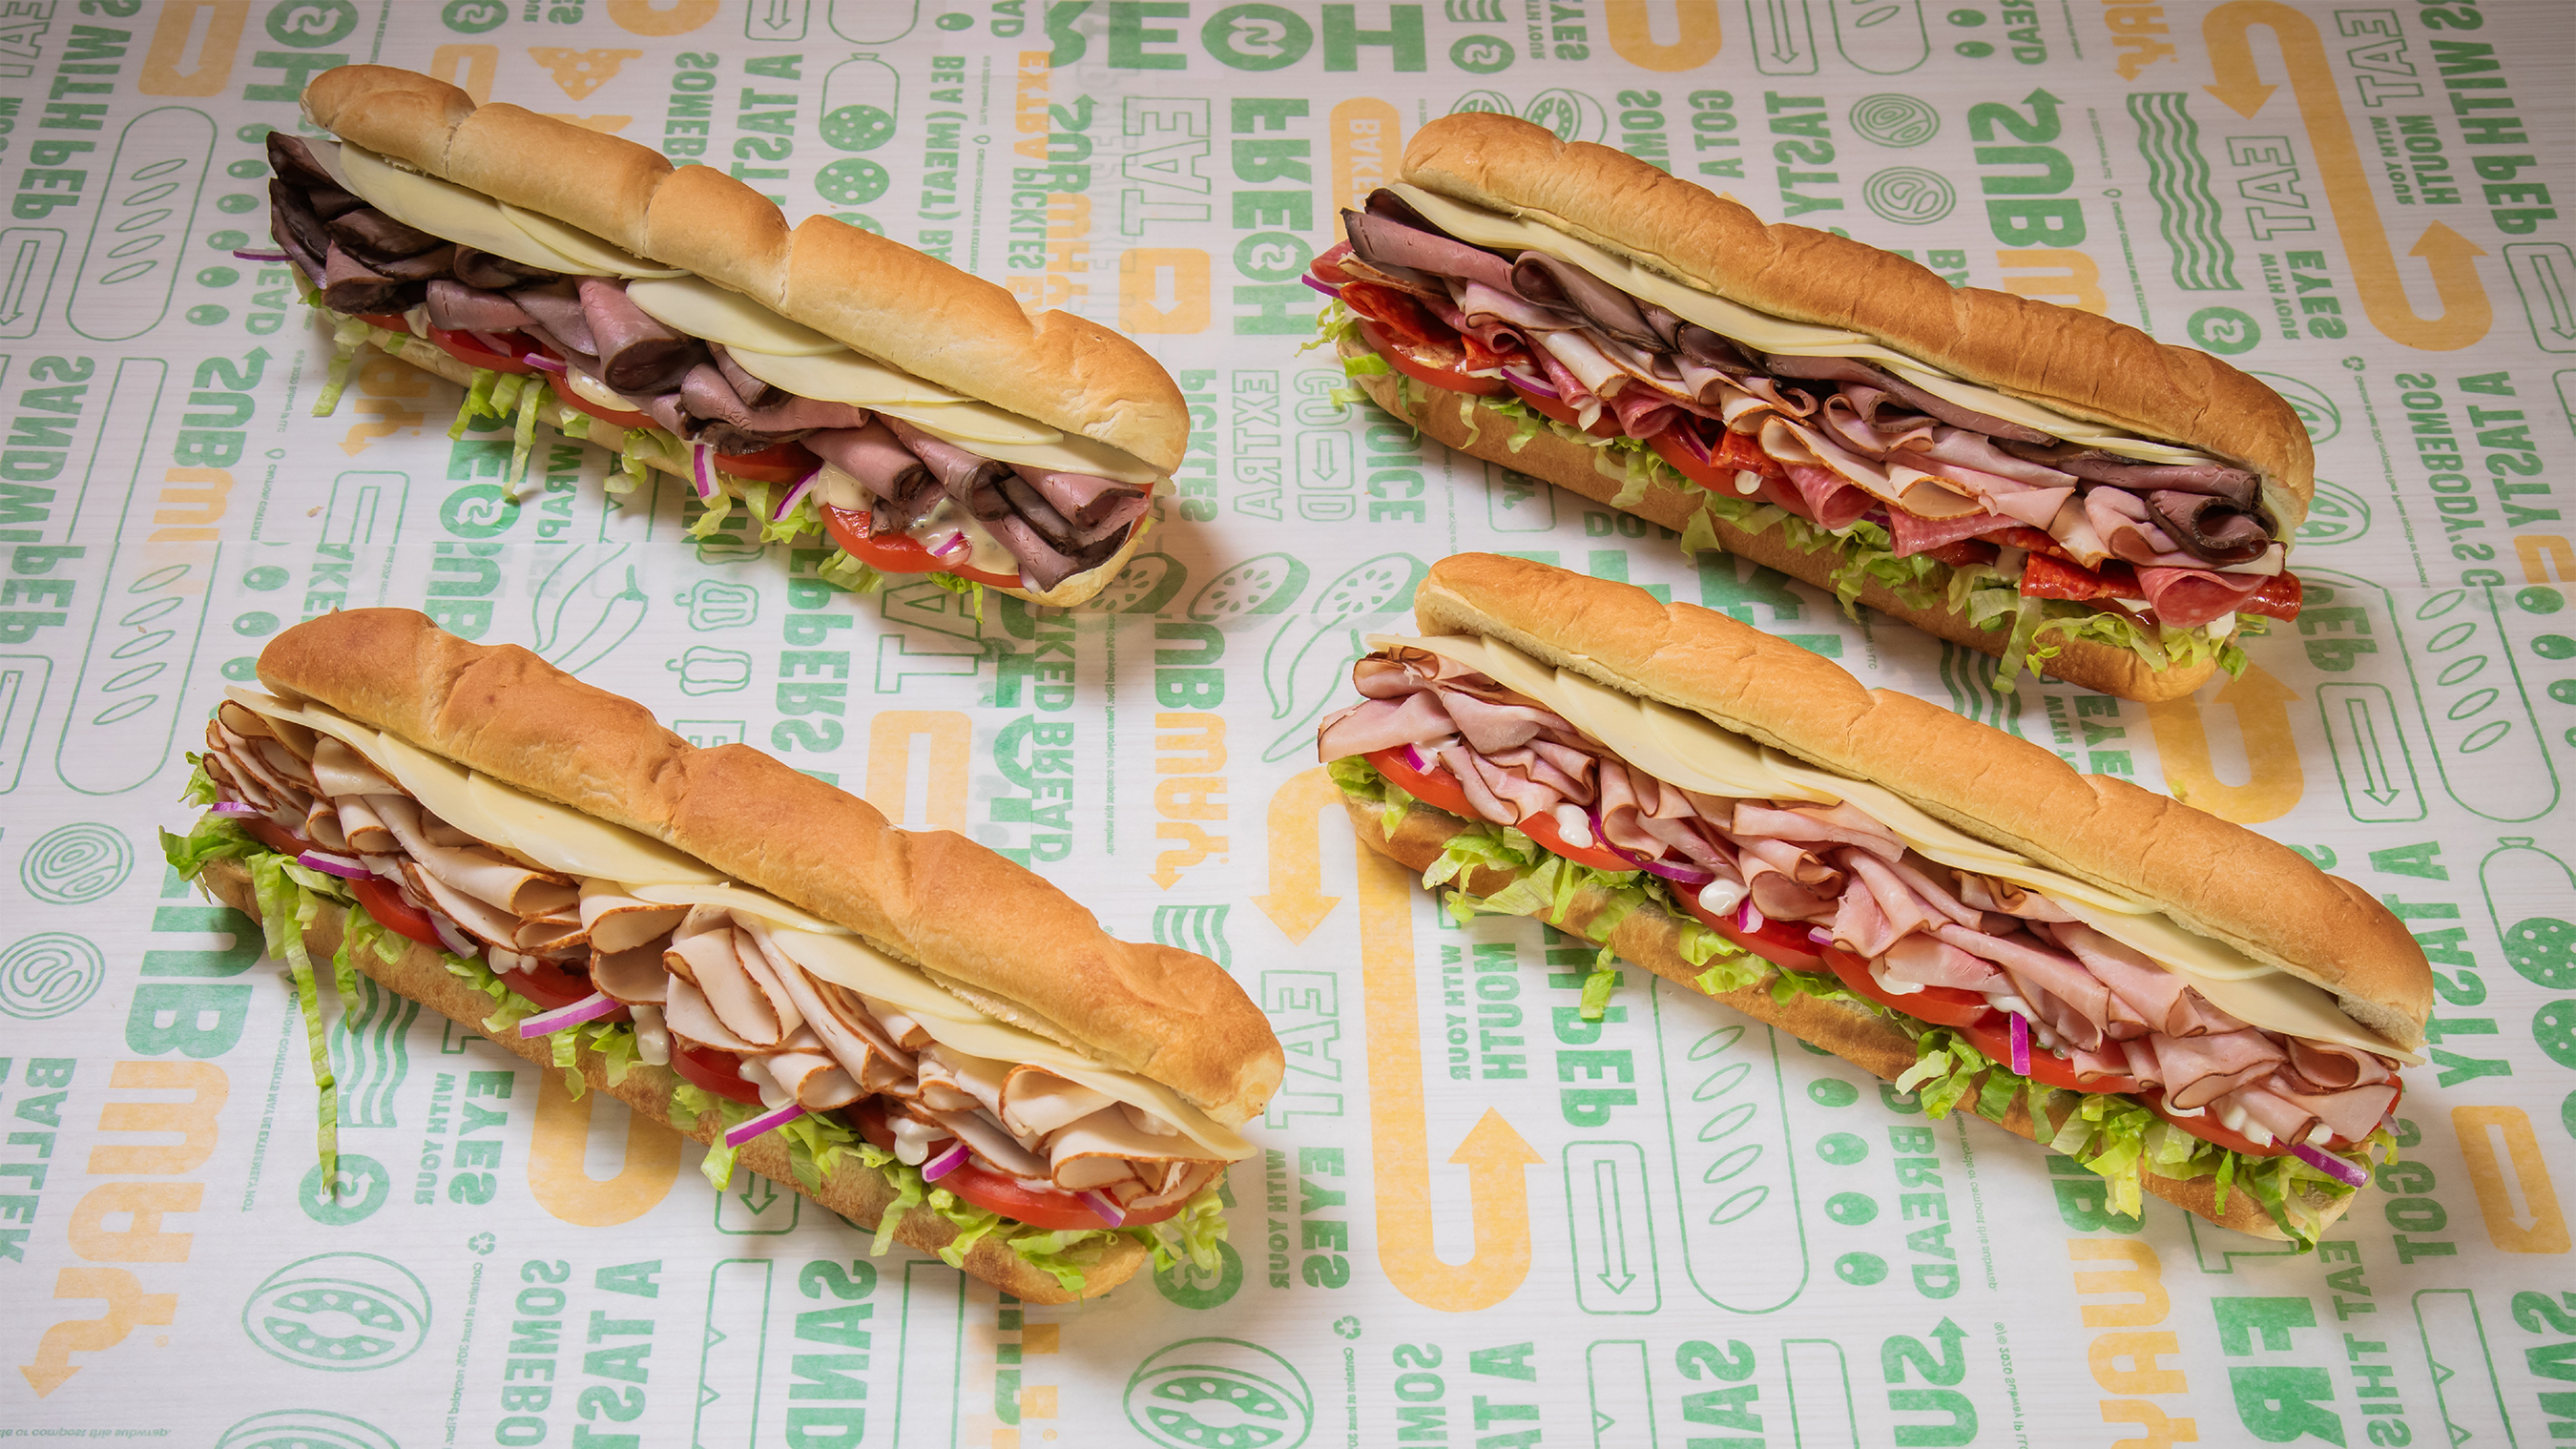 Subway’s four new Deli Hero subs are piled with more meat and cheese, showcasing the brand’s new freshly sliced meats.